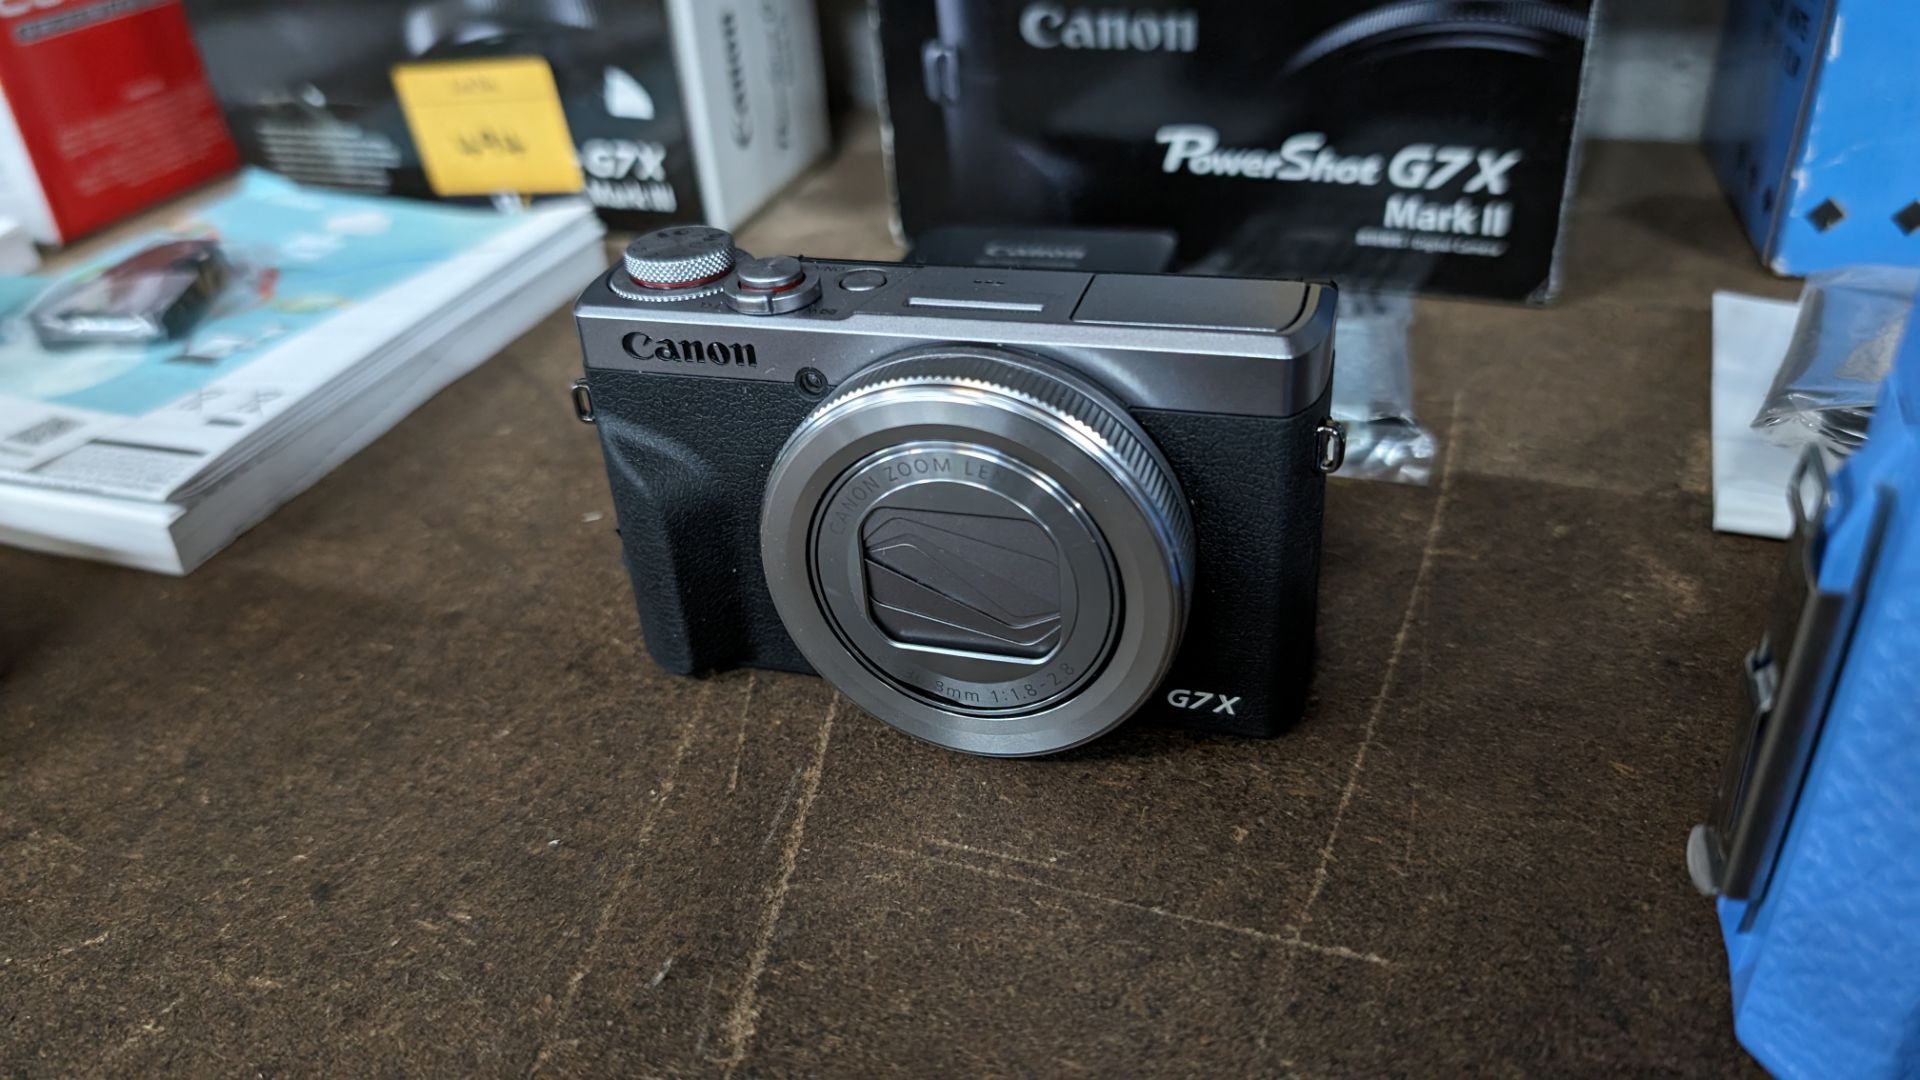 Canon PowerShot G7X Mark II camera, including battery and charger - Image 5 of 12